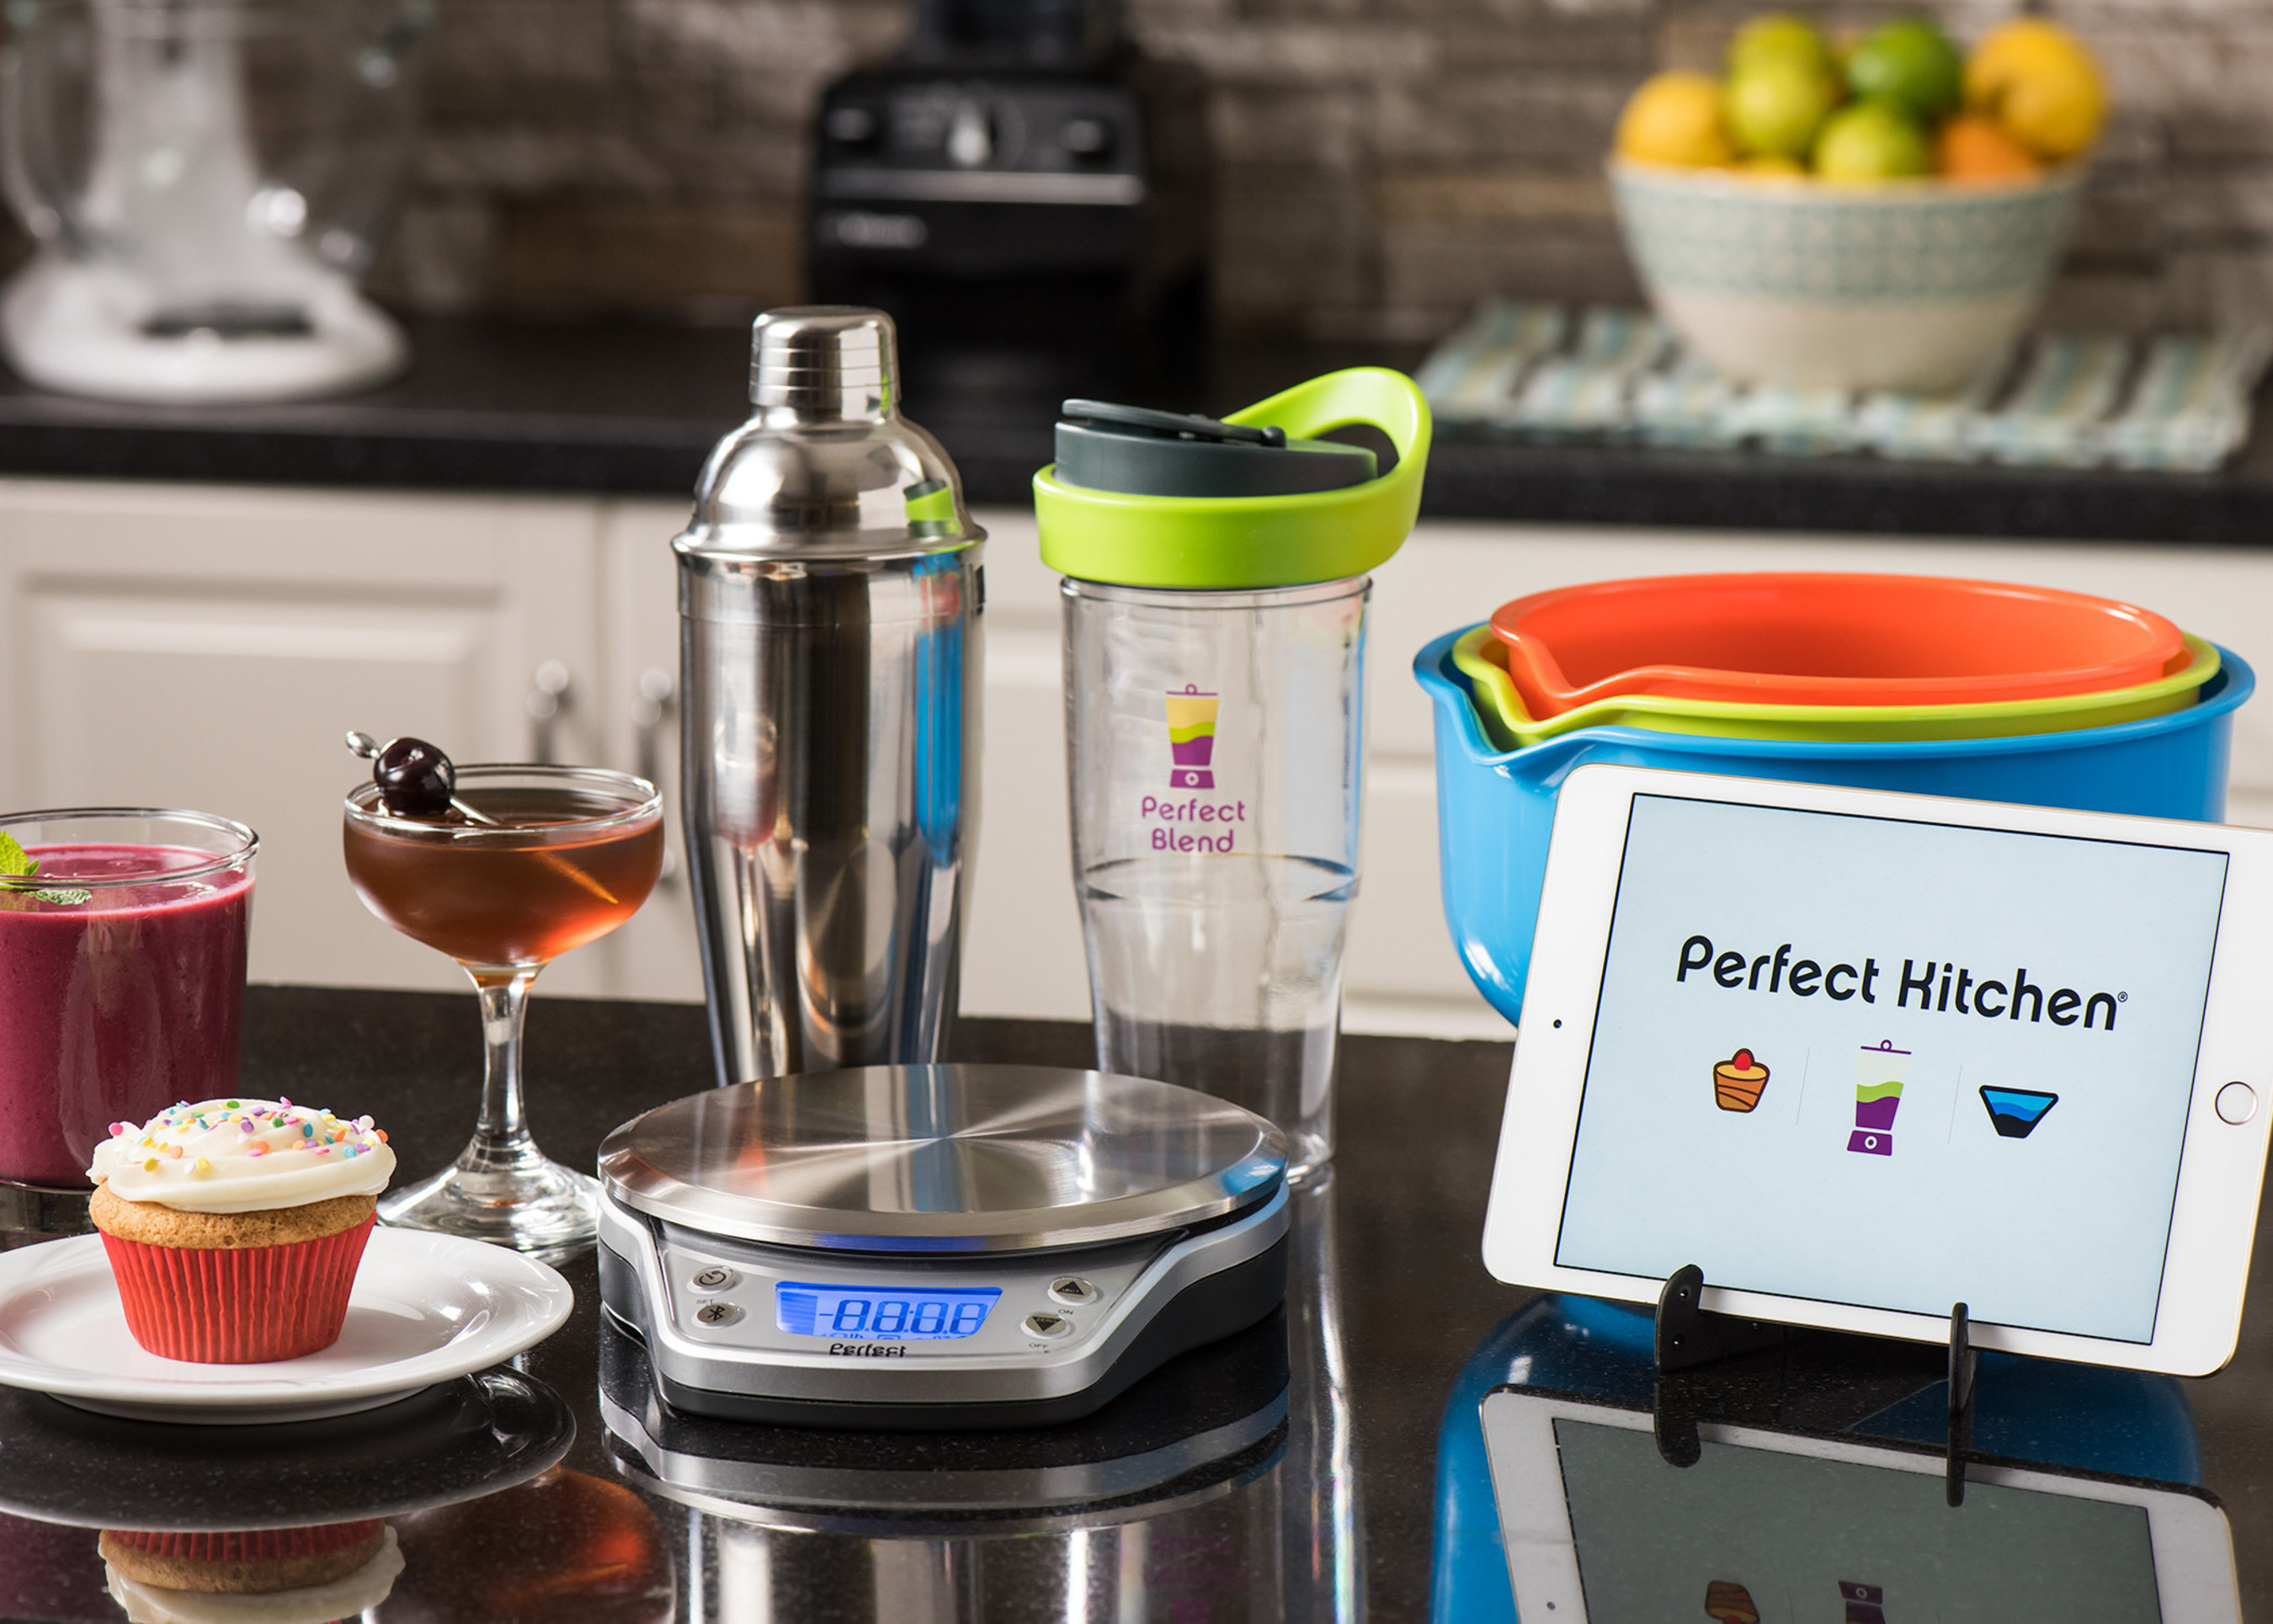 Perfect Kitchen PRO by Perfect Company is the ultimate smart scale and interactive recipe app system with everything home chefs need to create perfect drinks, baked goods and blended items. Available now exclusively at Sur La Table.